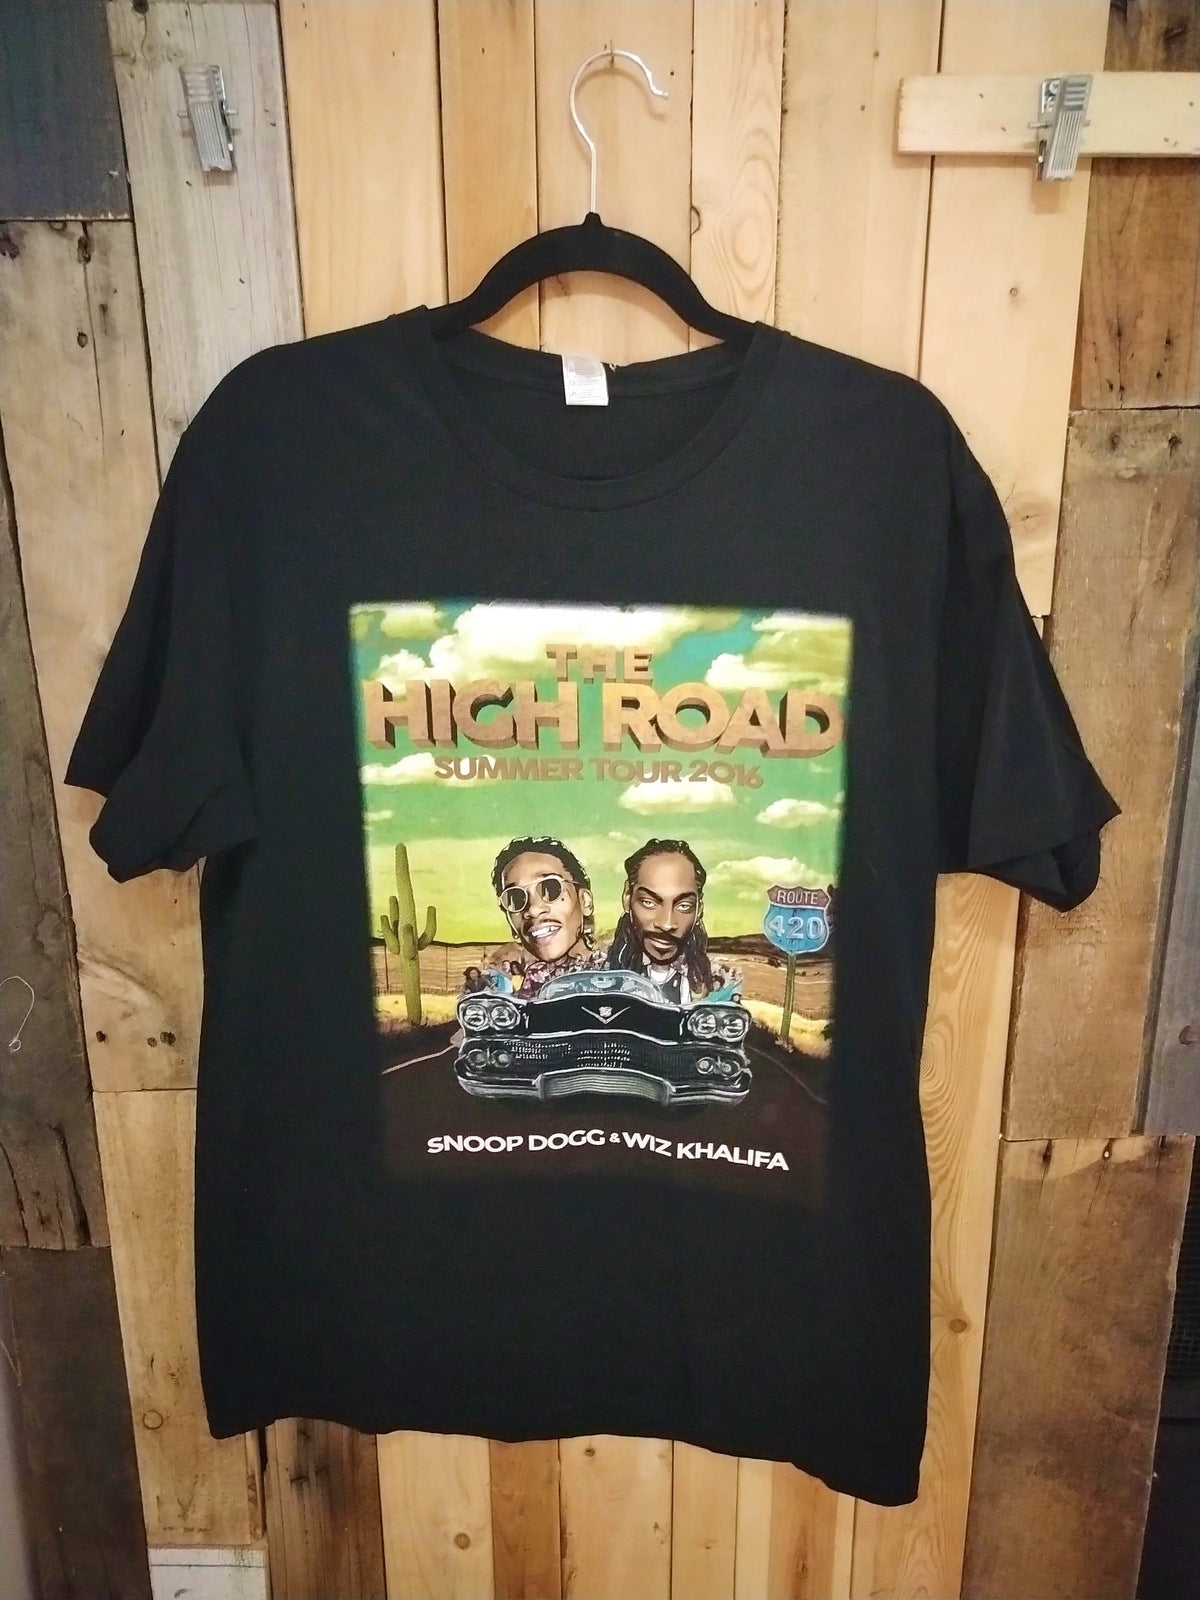 "The High Road" Tour 2016 T Shirt Size Large 721793WH